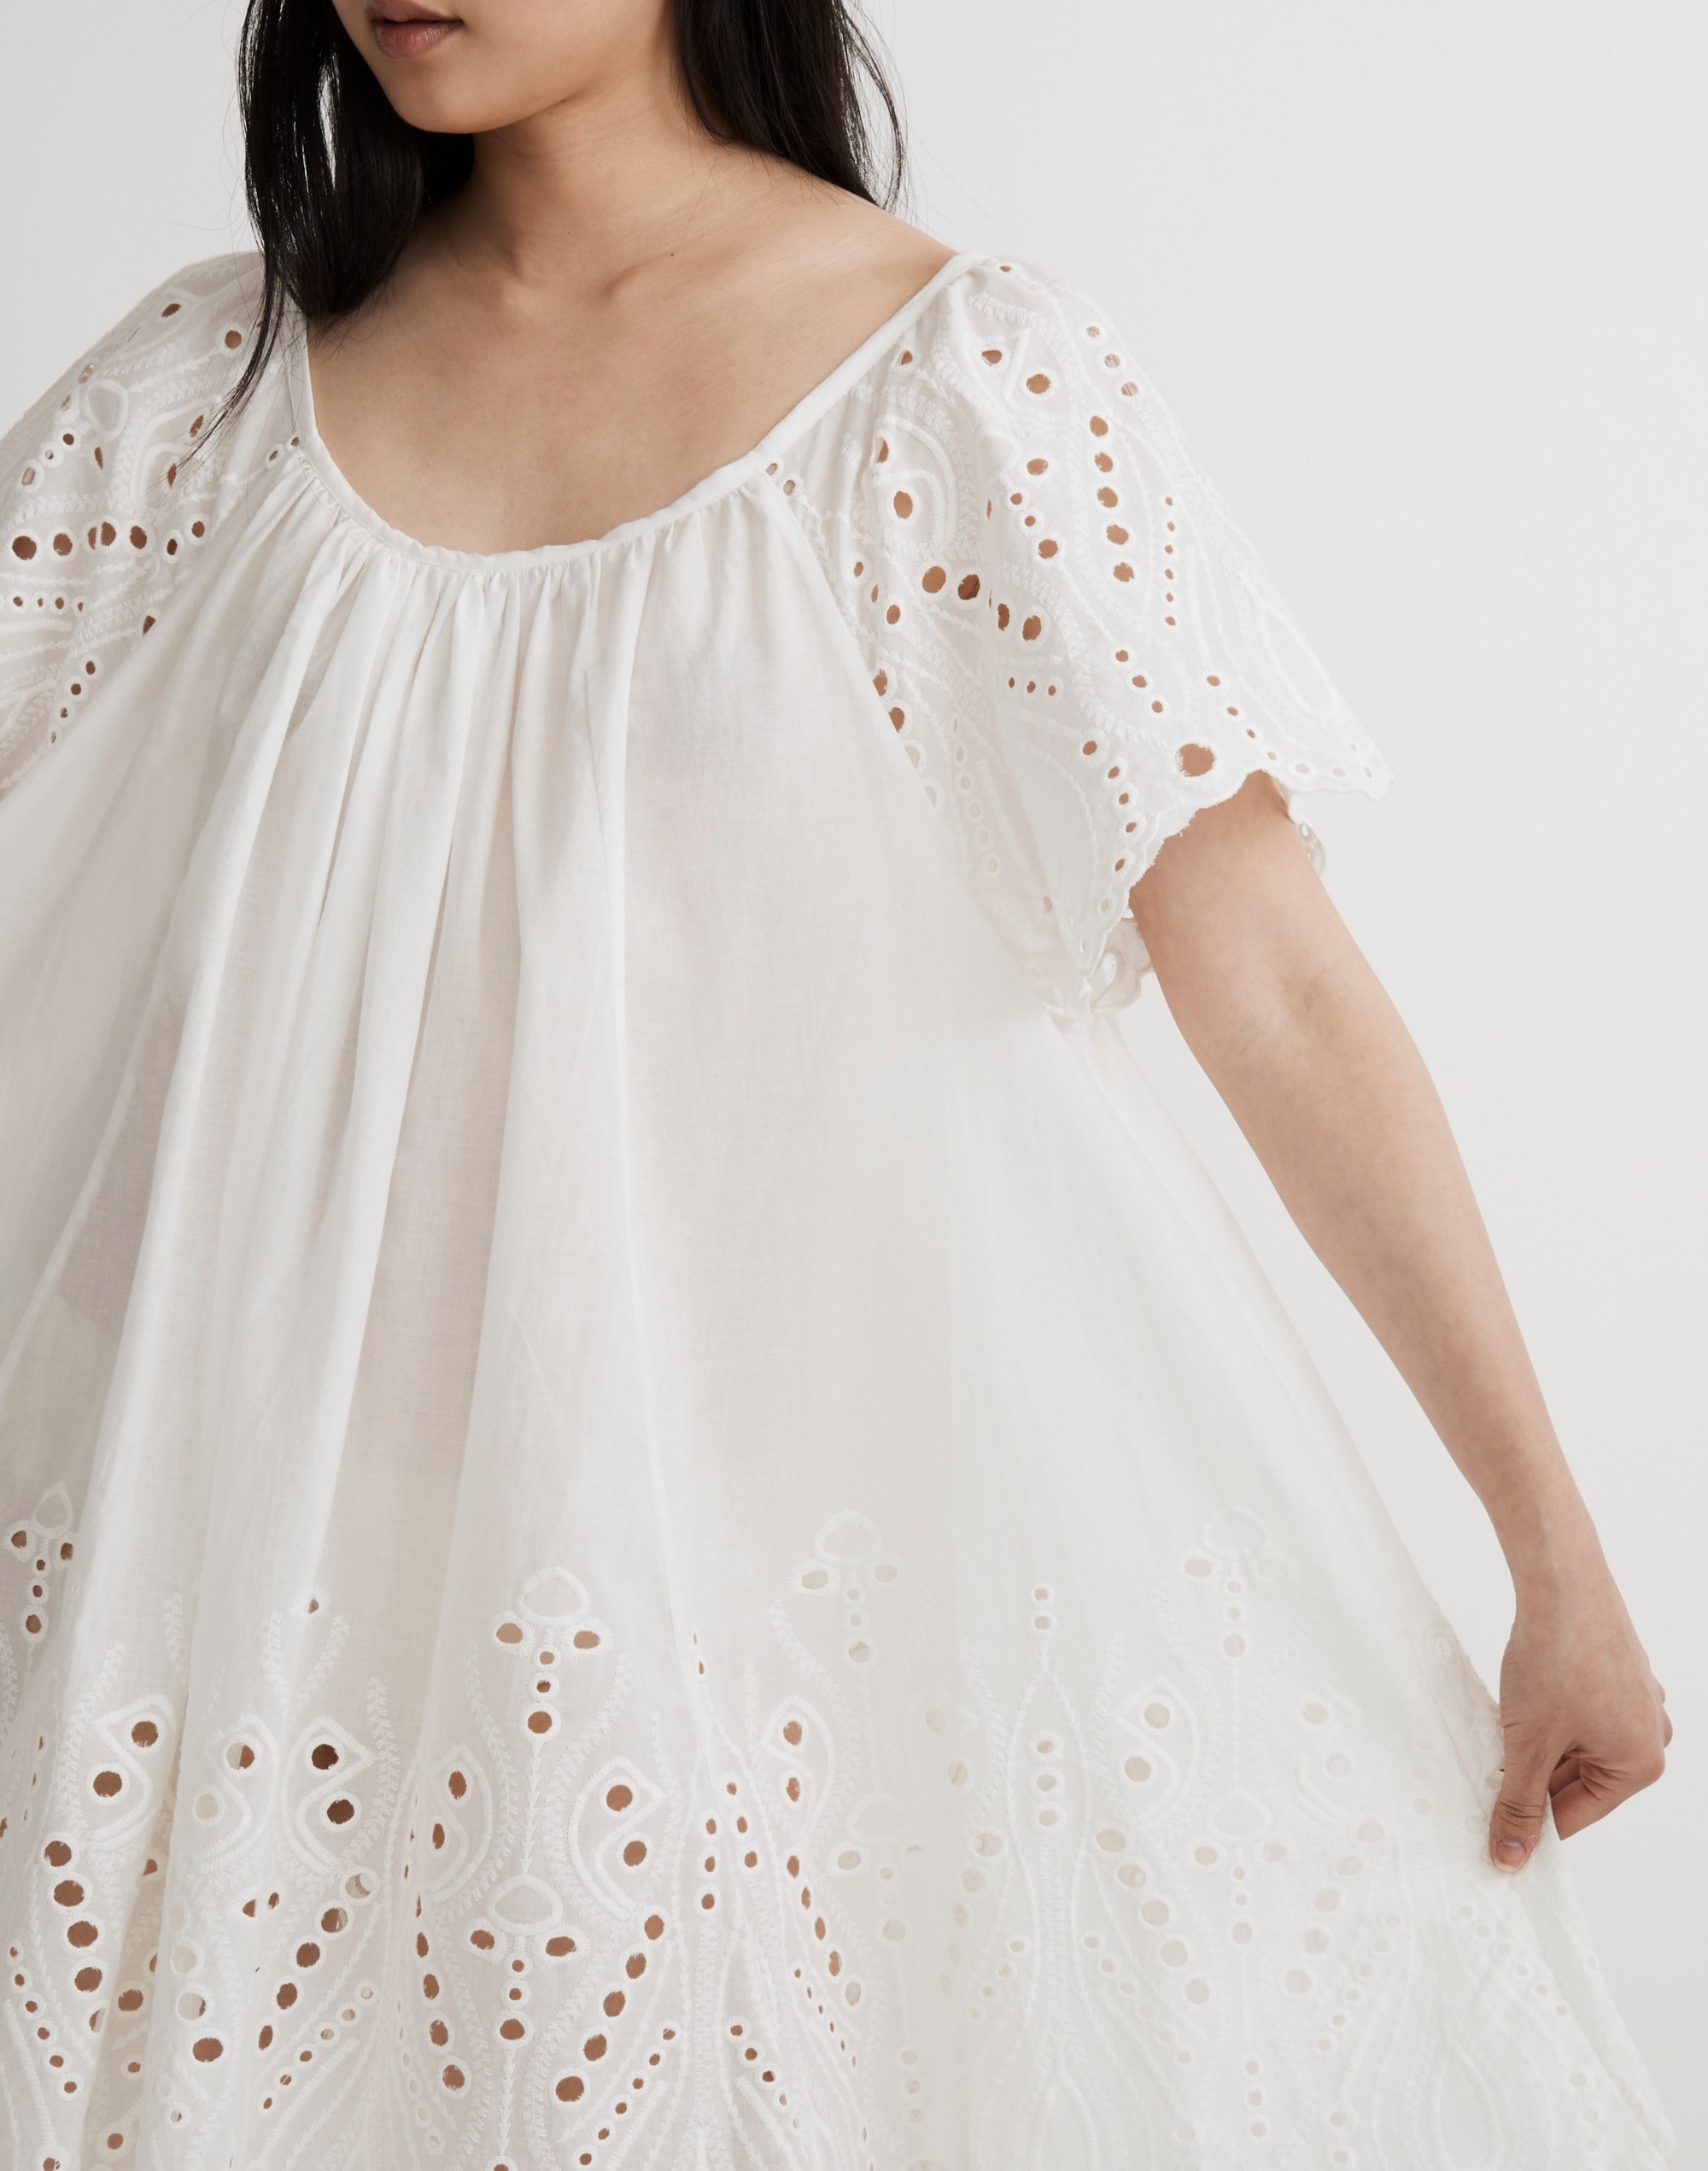 Natalie Martin Embroidered Marina Cover-Up Dress